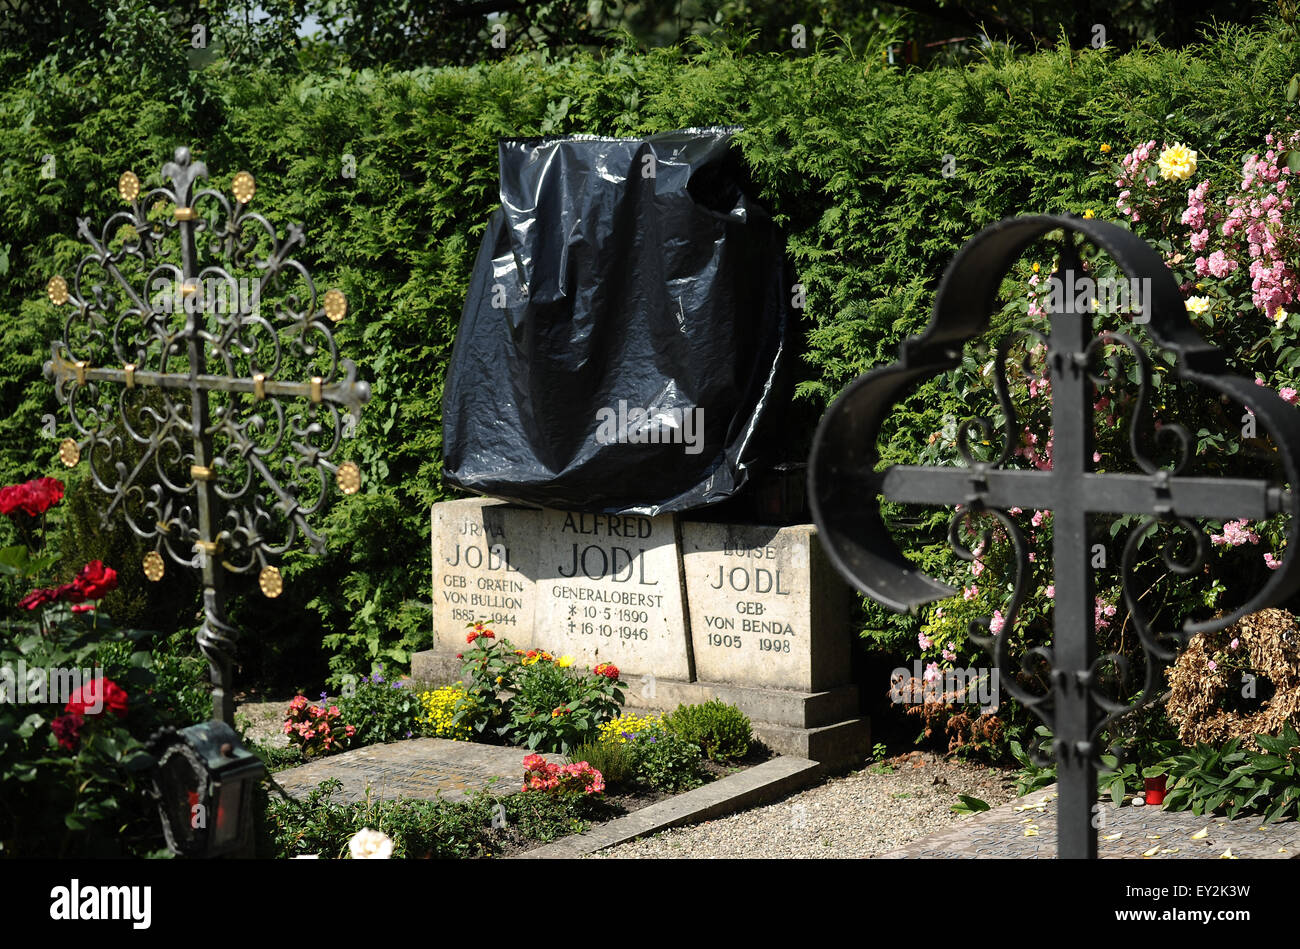 The grave of Colonel-General Alfred Jodl has been partly covered with tarpaulin at the cemetery on the Fraueninsel island on Chiemsee lake, Germany, 03 July 2015. Serving as Chief of the Operations Staff of the Armed Forces High Command (Oberkommando der Wehrmacht, OKW) during World War II, he played a leading role in the conception of German military operations. During the Nuremberg trials, he was pronounced guilty in 1946, sentenced to death and hanged as a war criminal on 16 October of the same year. Photo: Angelika Warmuth/dpa Stock Photo